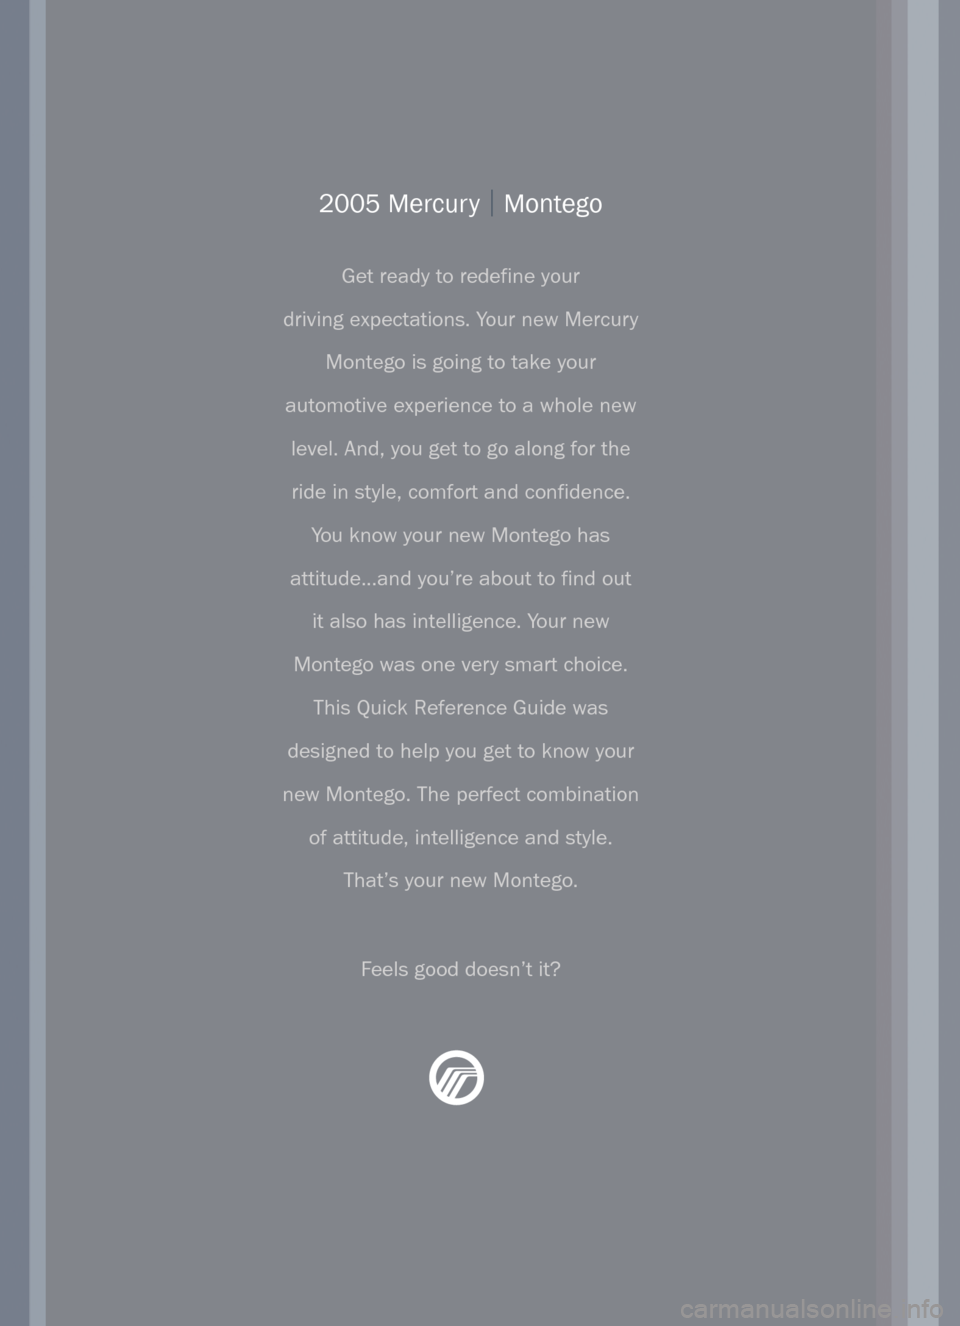 Mercury Montego 2005  Quick Reference Guide 2005 Mercury |Montego
Get ready to redefine your
driving expectations. Your new Mercury
Montego is going to take your
automotive experience to a whole new
level. And, you get to go along for the
ride 